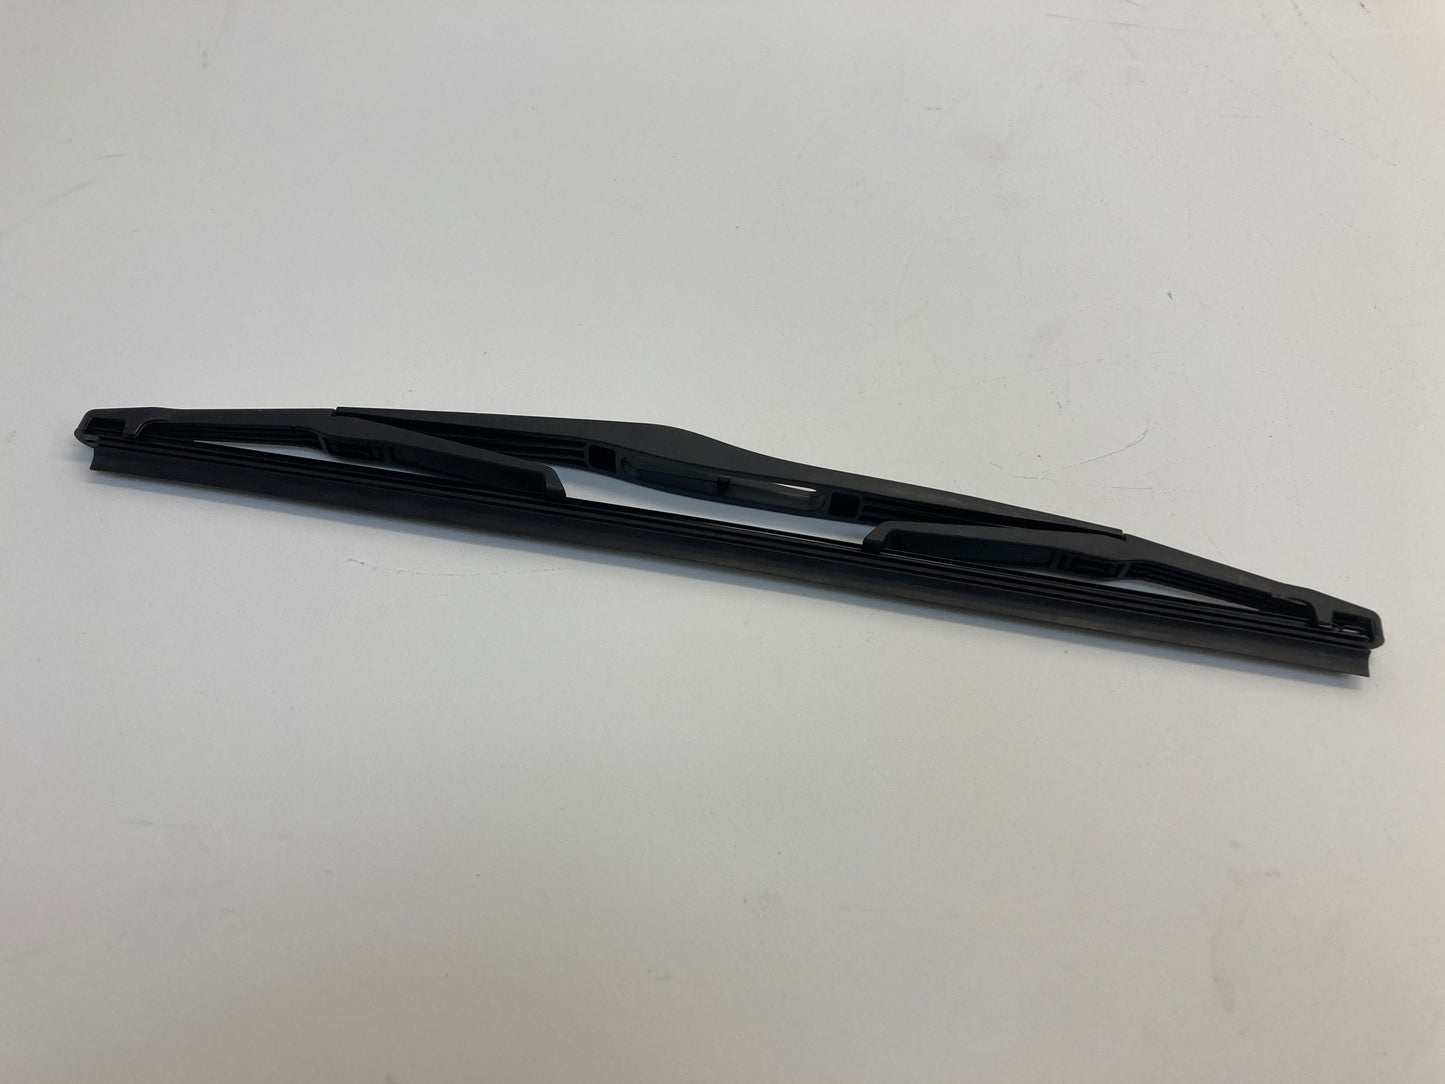 Land Rover Discovery II Rear Wiper Blade NEW DKC100890